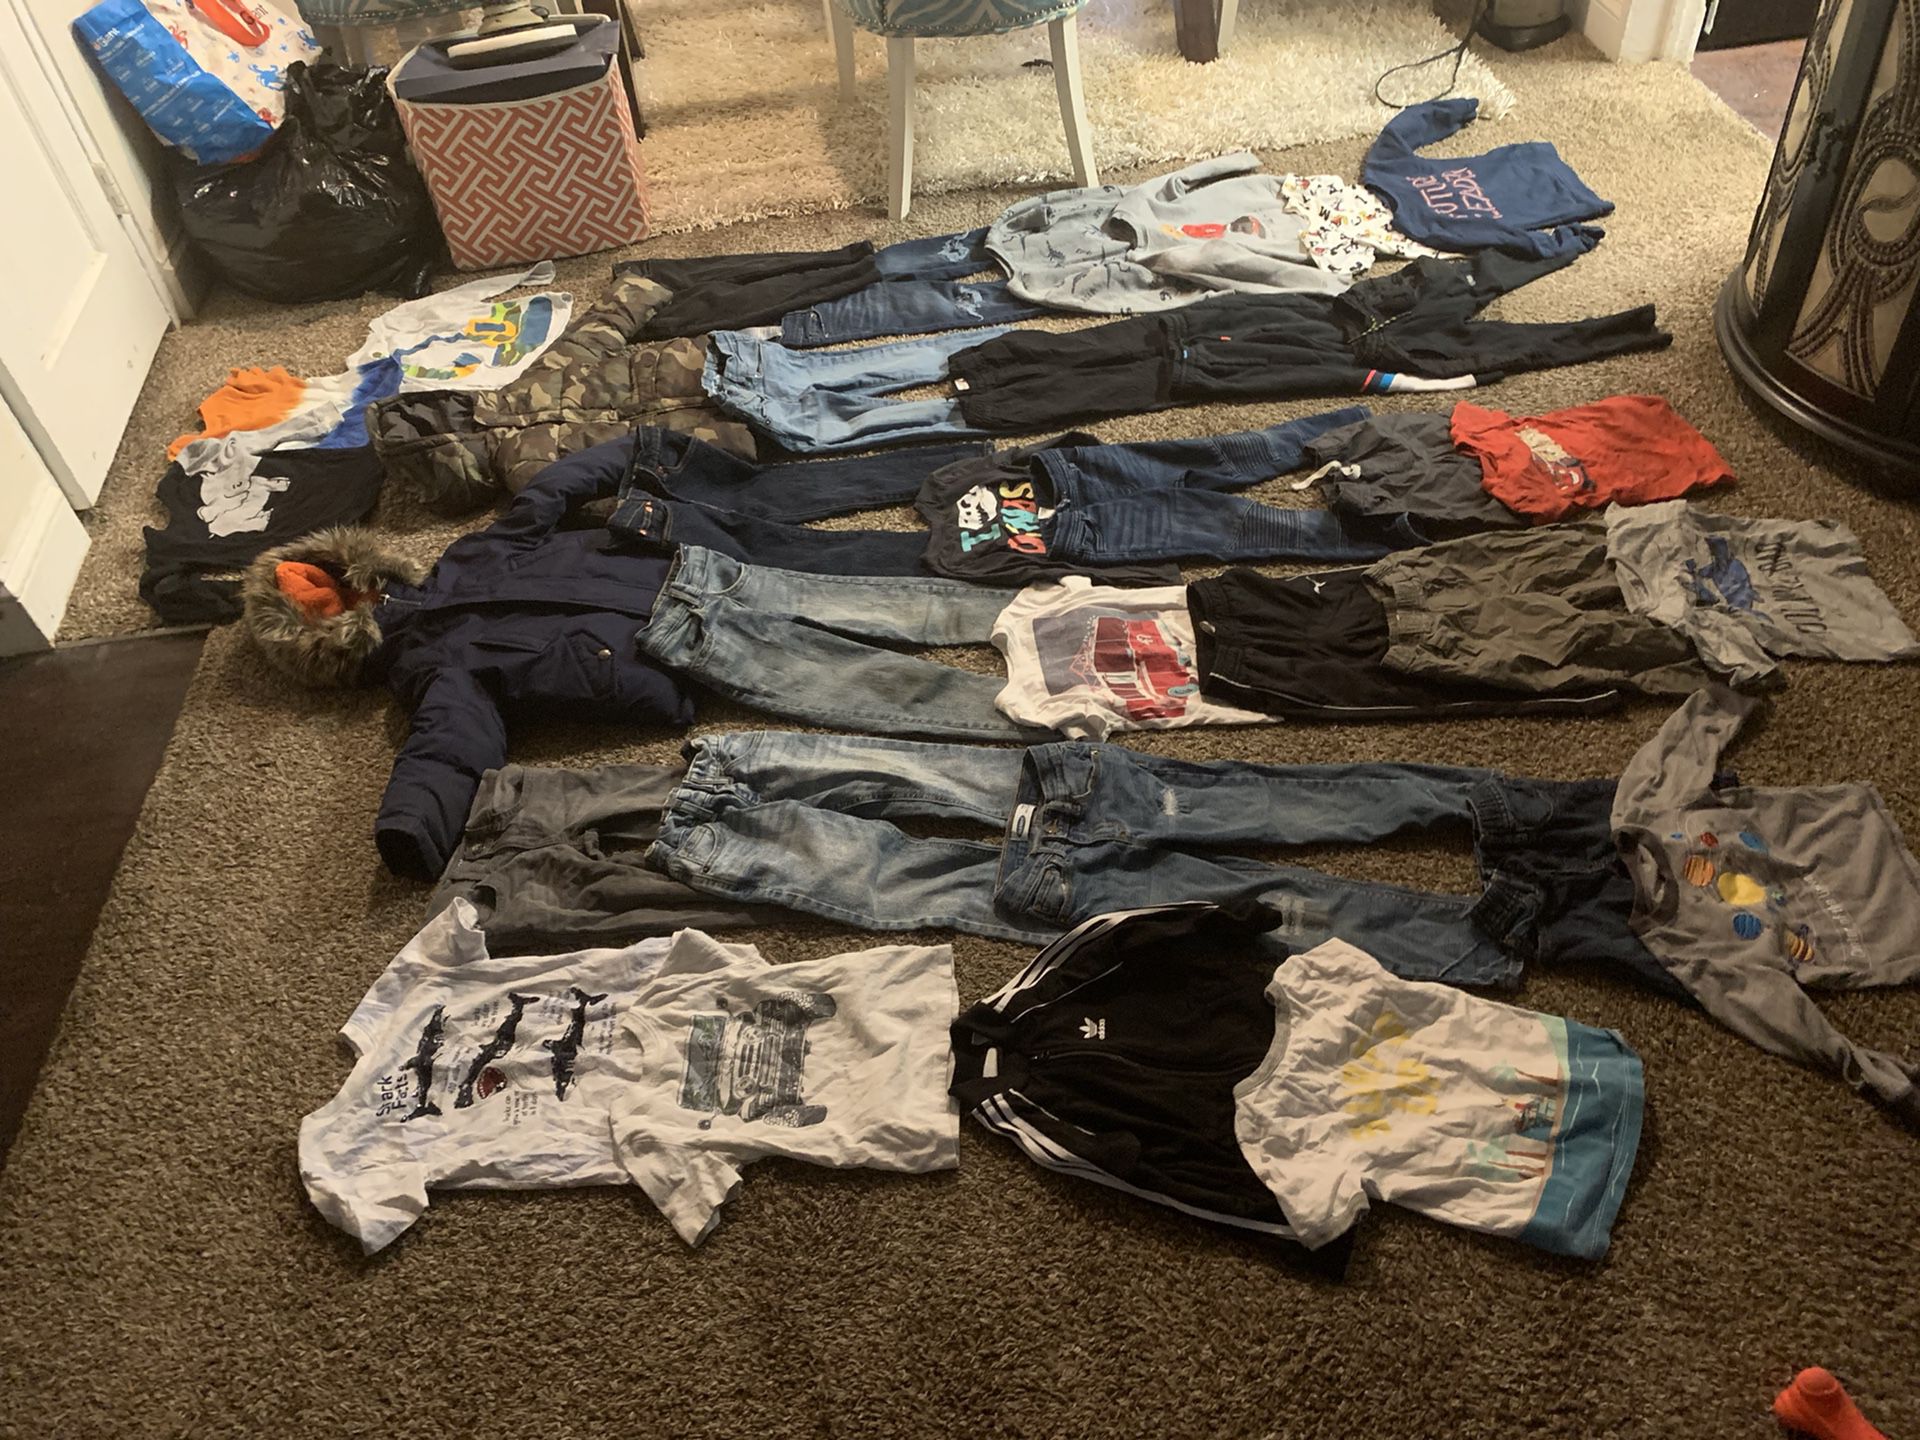 Kids boy clothes 3t-4t 20pants 20 shirts 3 jackets all good condition everything for 80.00 need gone today 